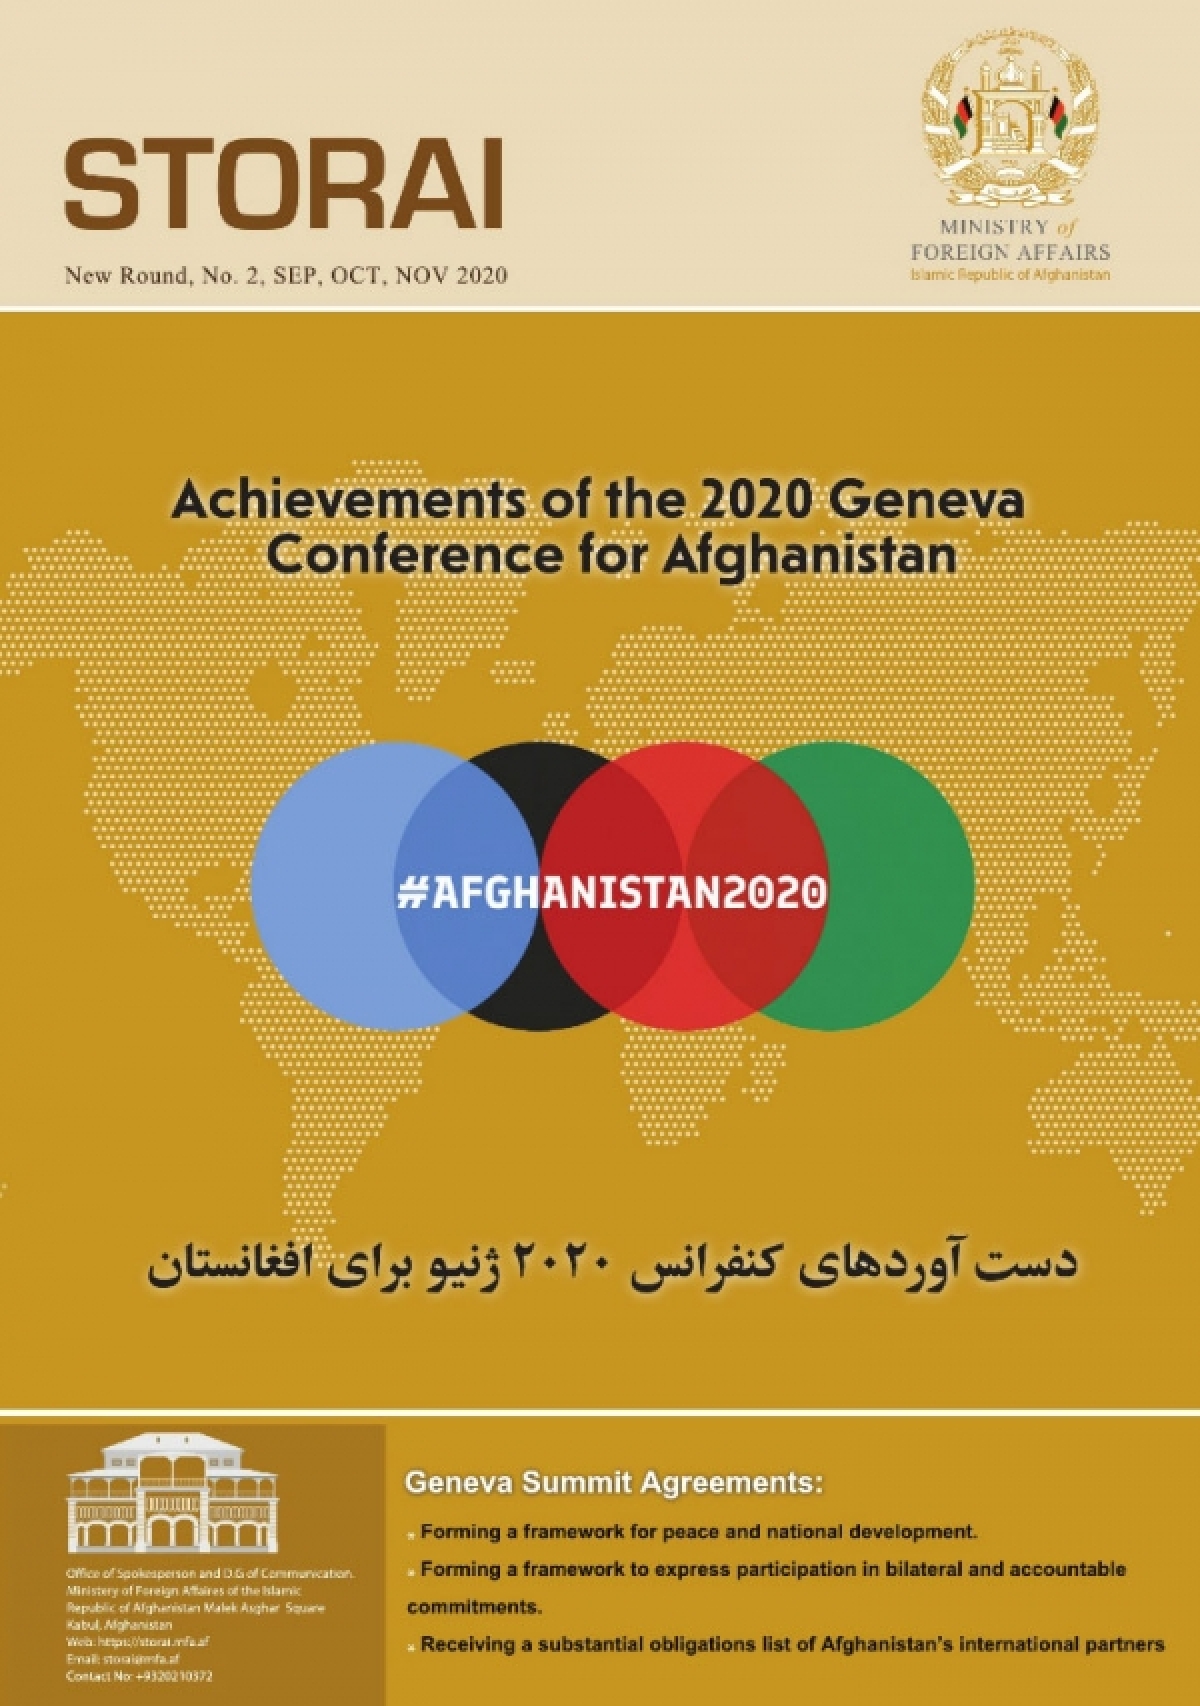 Achievement of the 2020 Geneva conference for Afghanistan